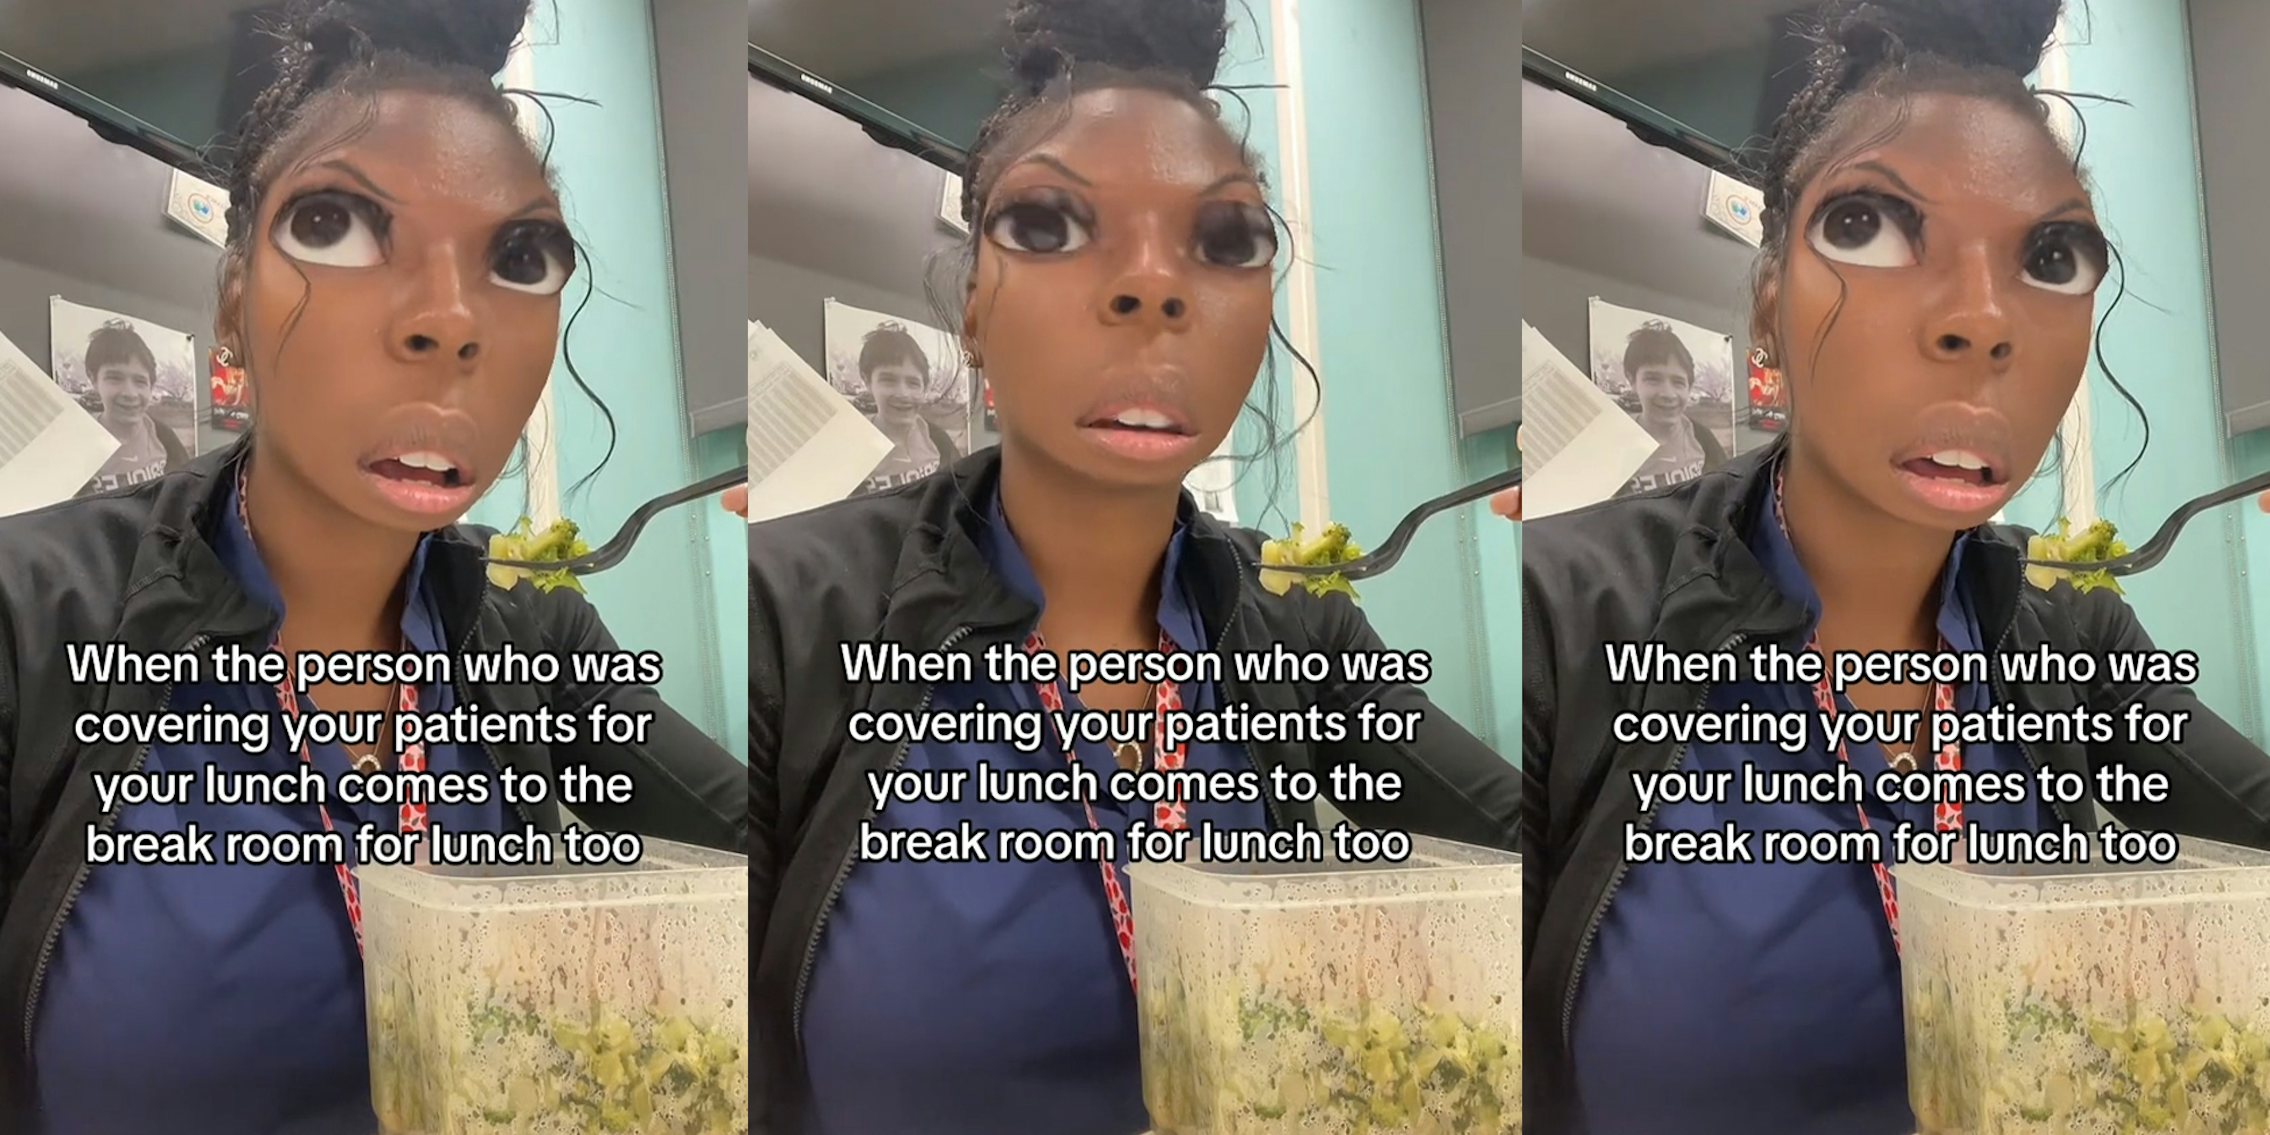 Worker takes lunch break. But she sees co-worker who's supposed to be covering her shift in the break room